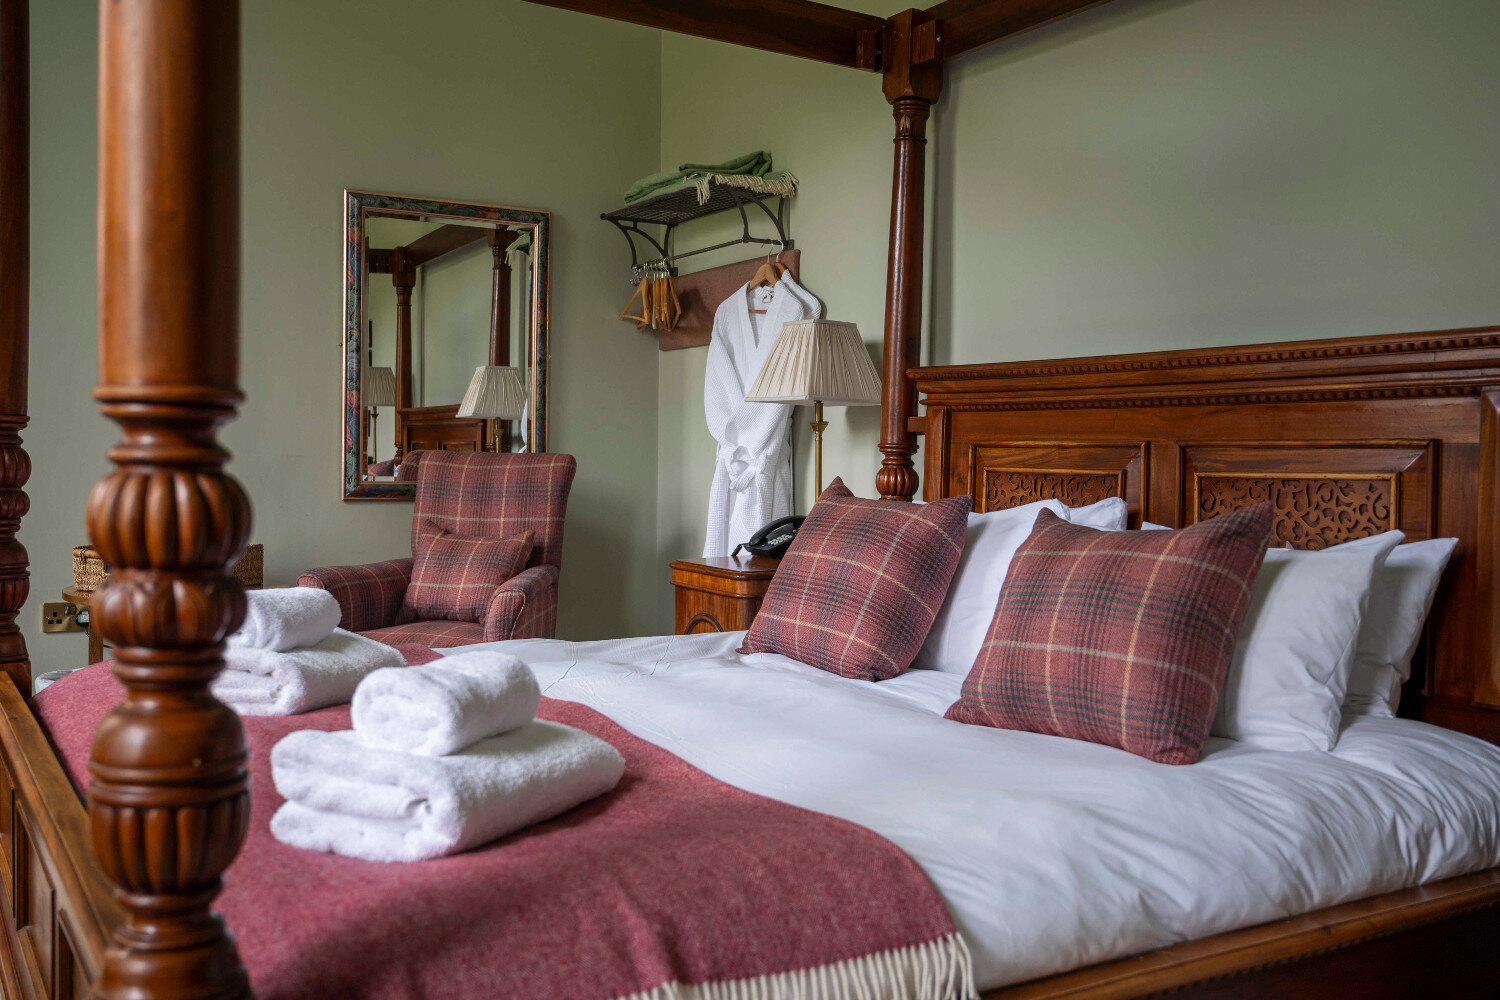 Saplinbrae Hotel, Aberdeenshire - king room with stylish four poster bed.JPG